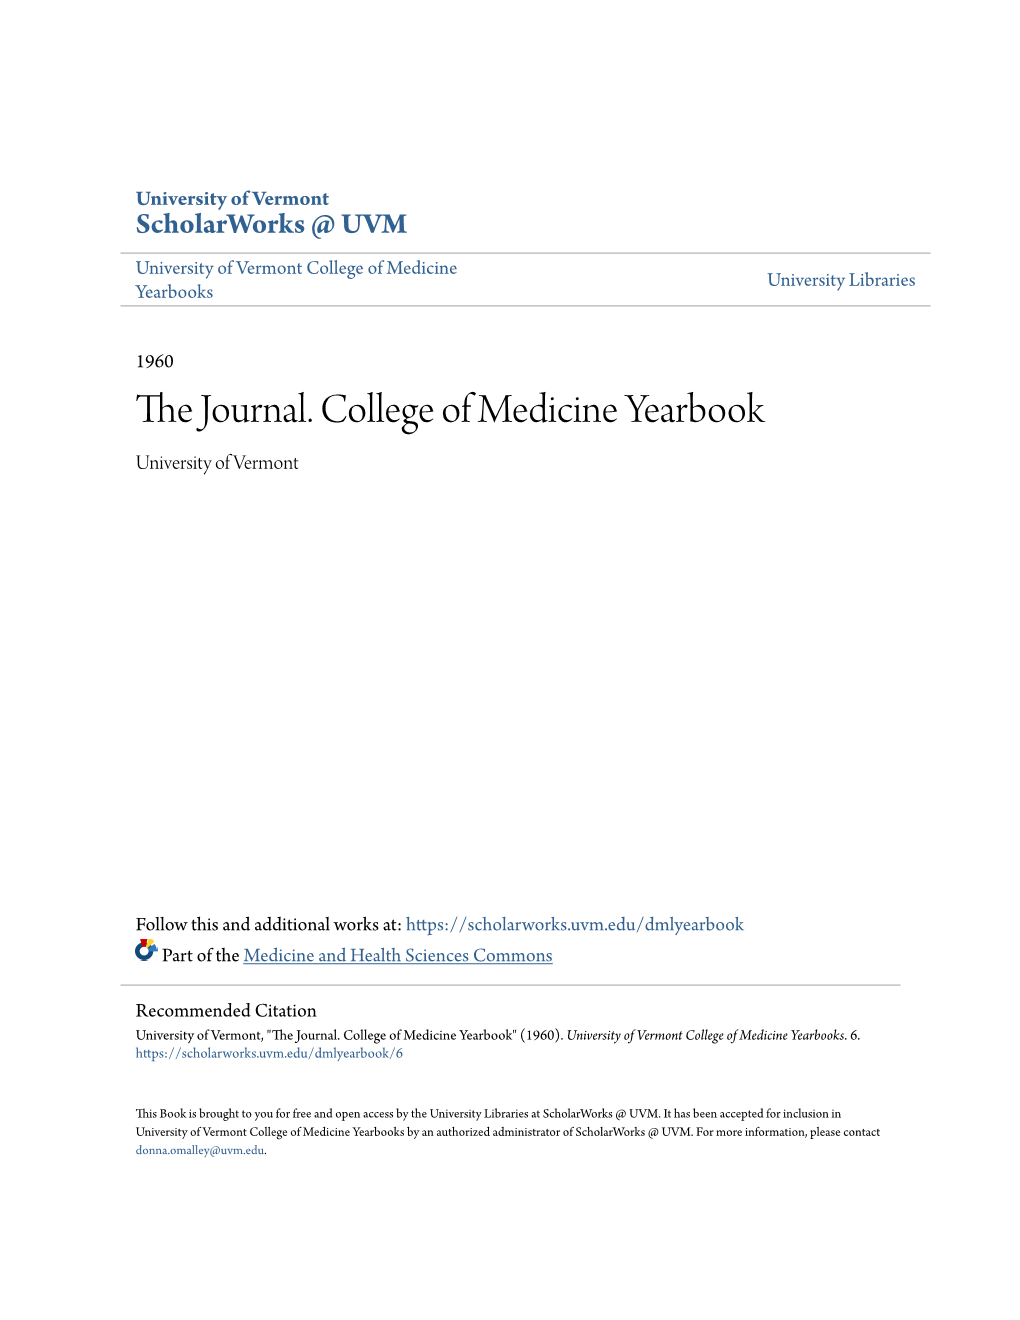 The Journal. College of Medicine Yearbook